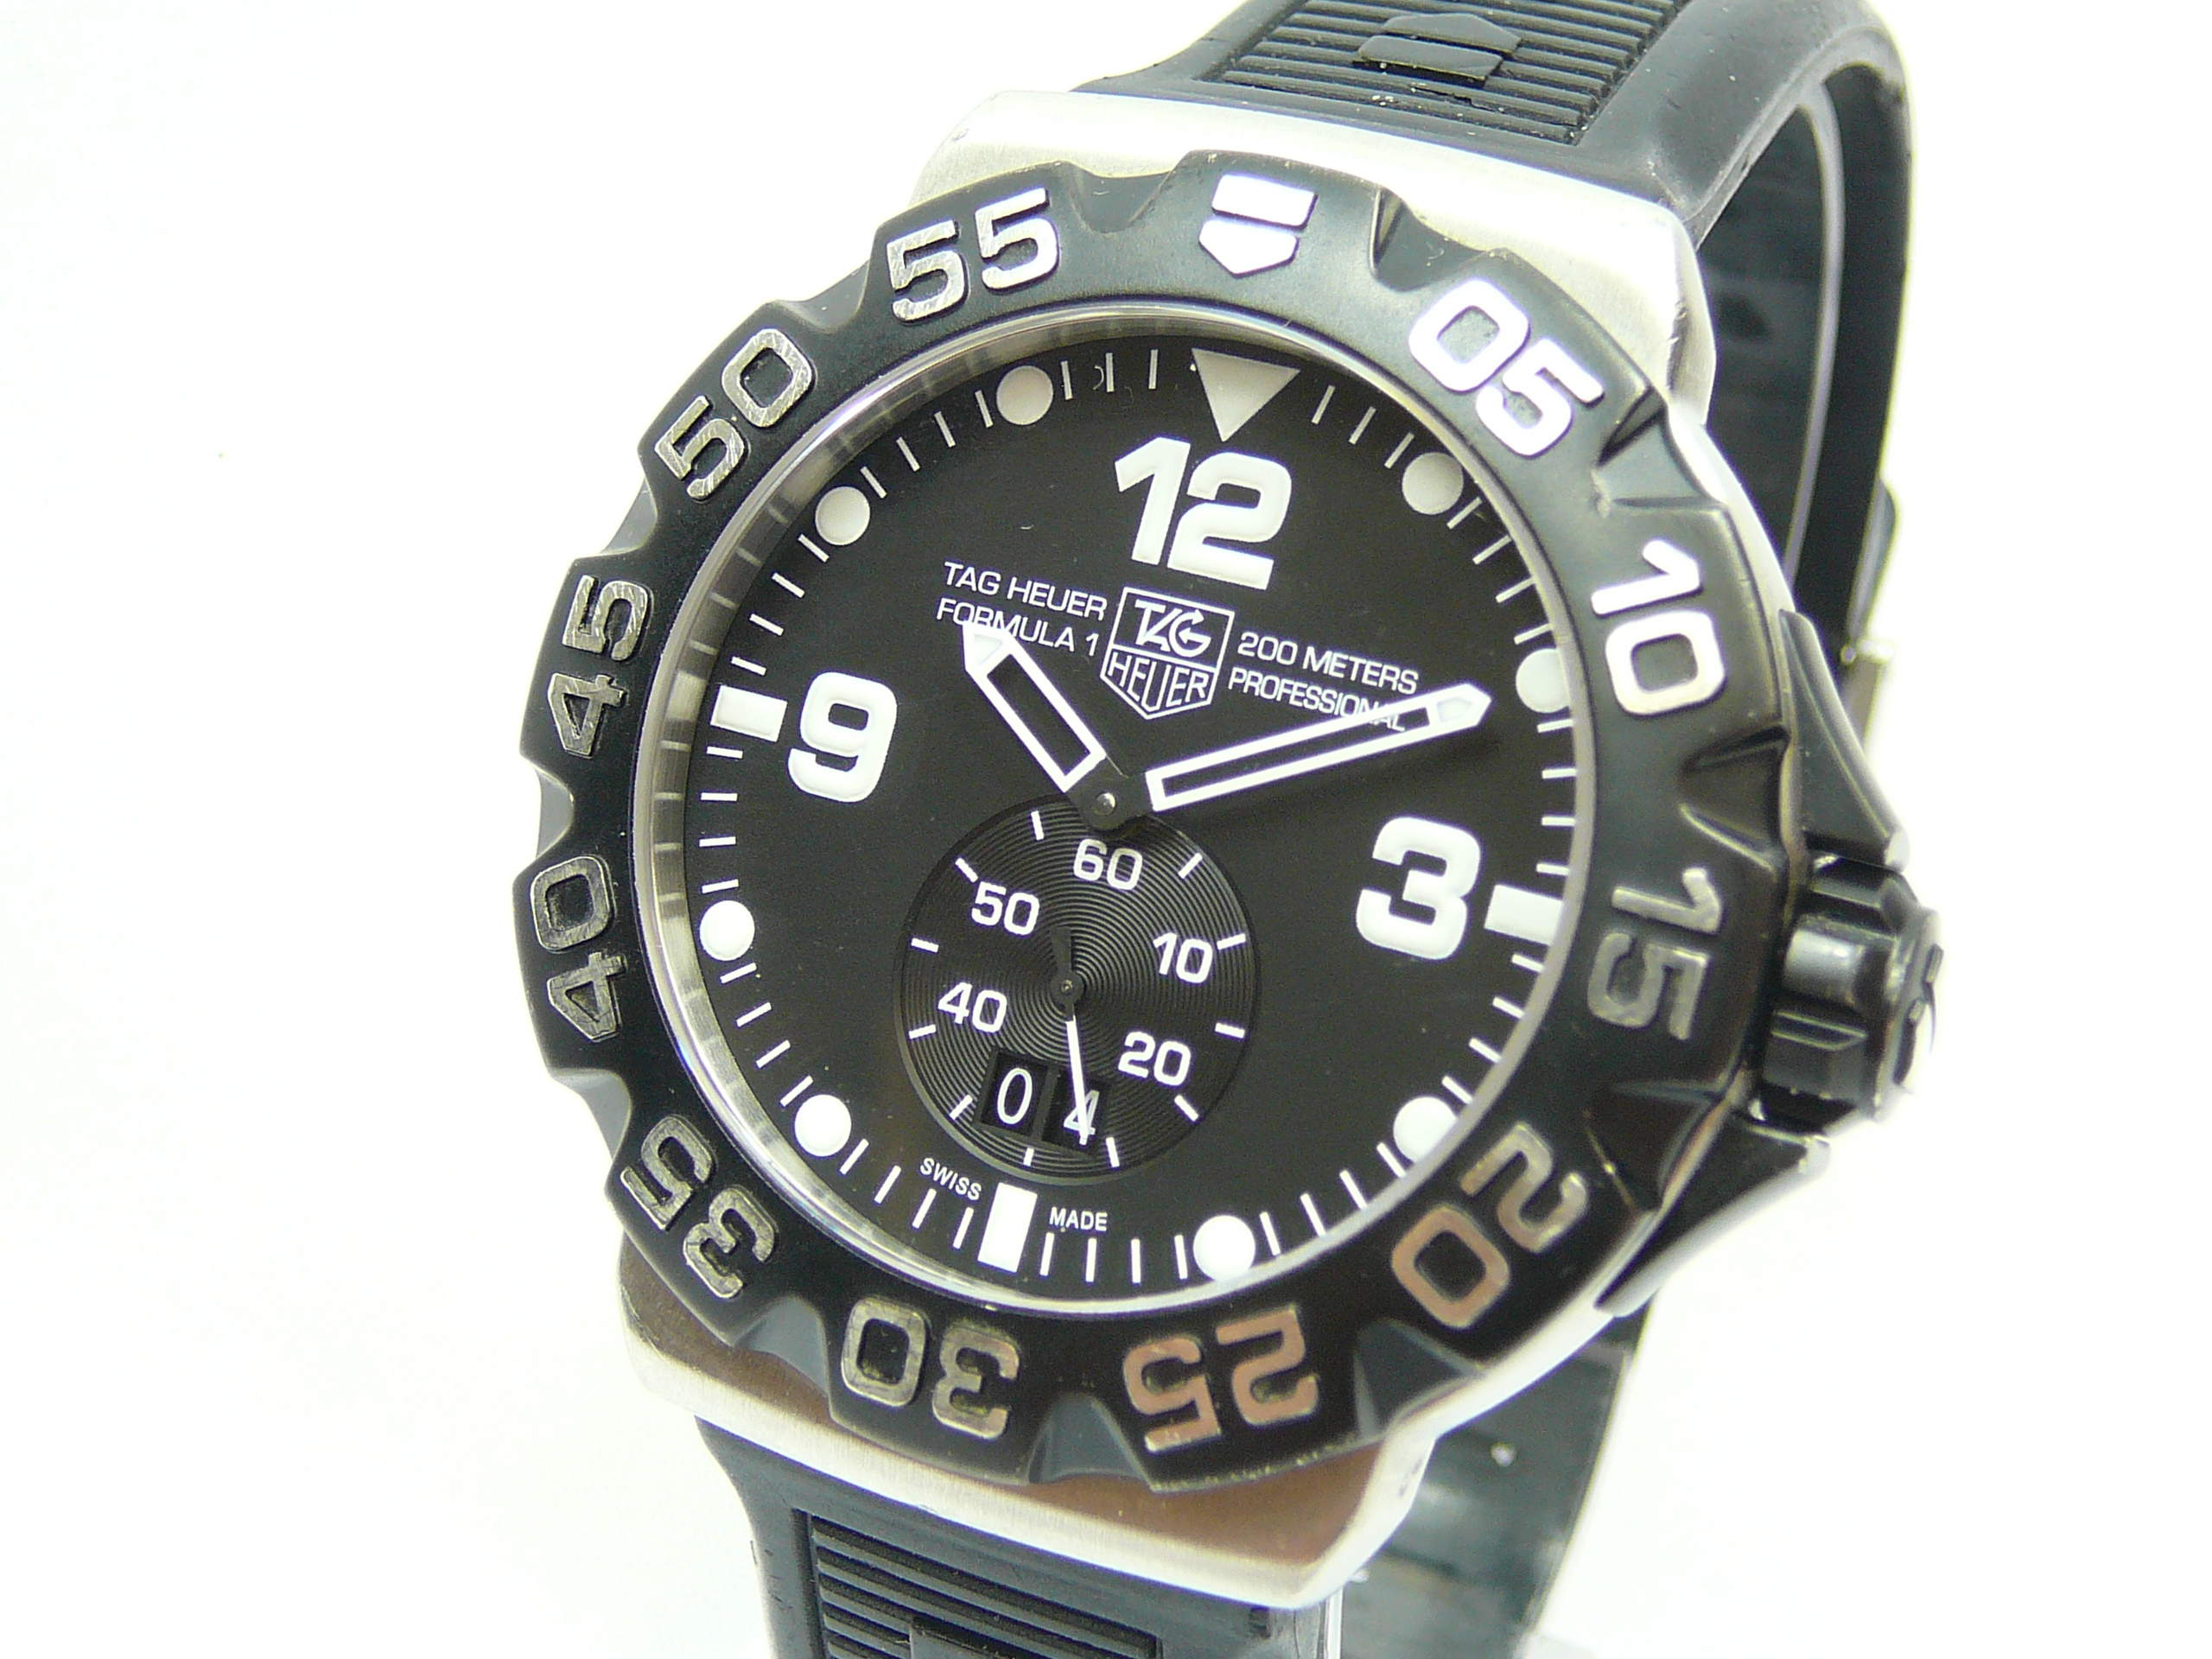 Gents Tag Heuer Wrist Watch - Image 2 of 4